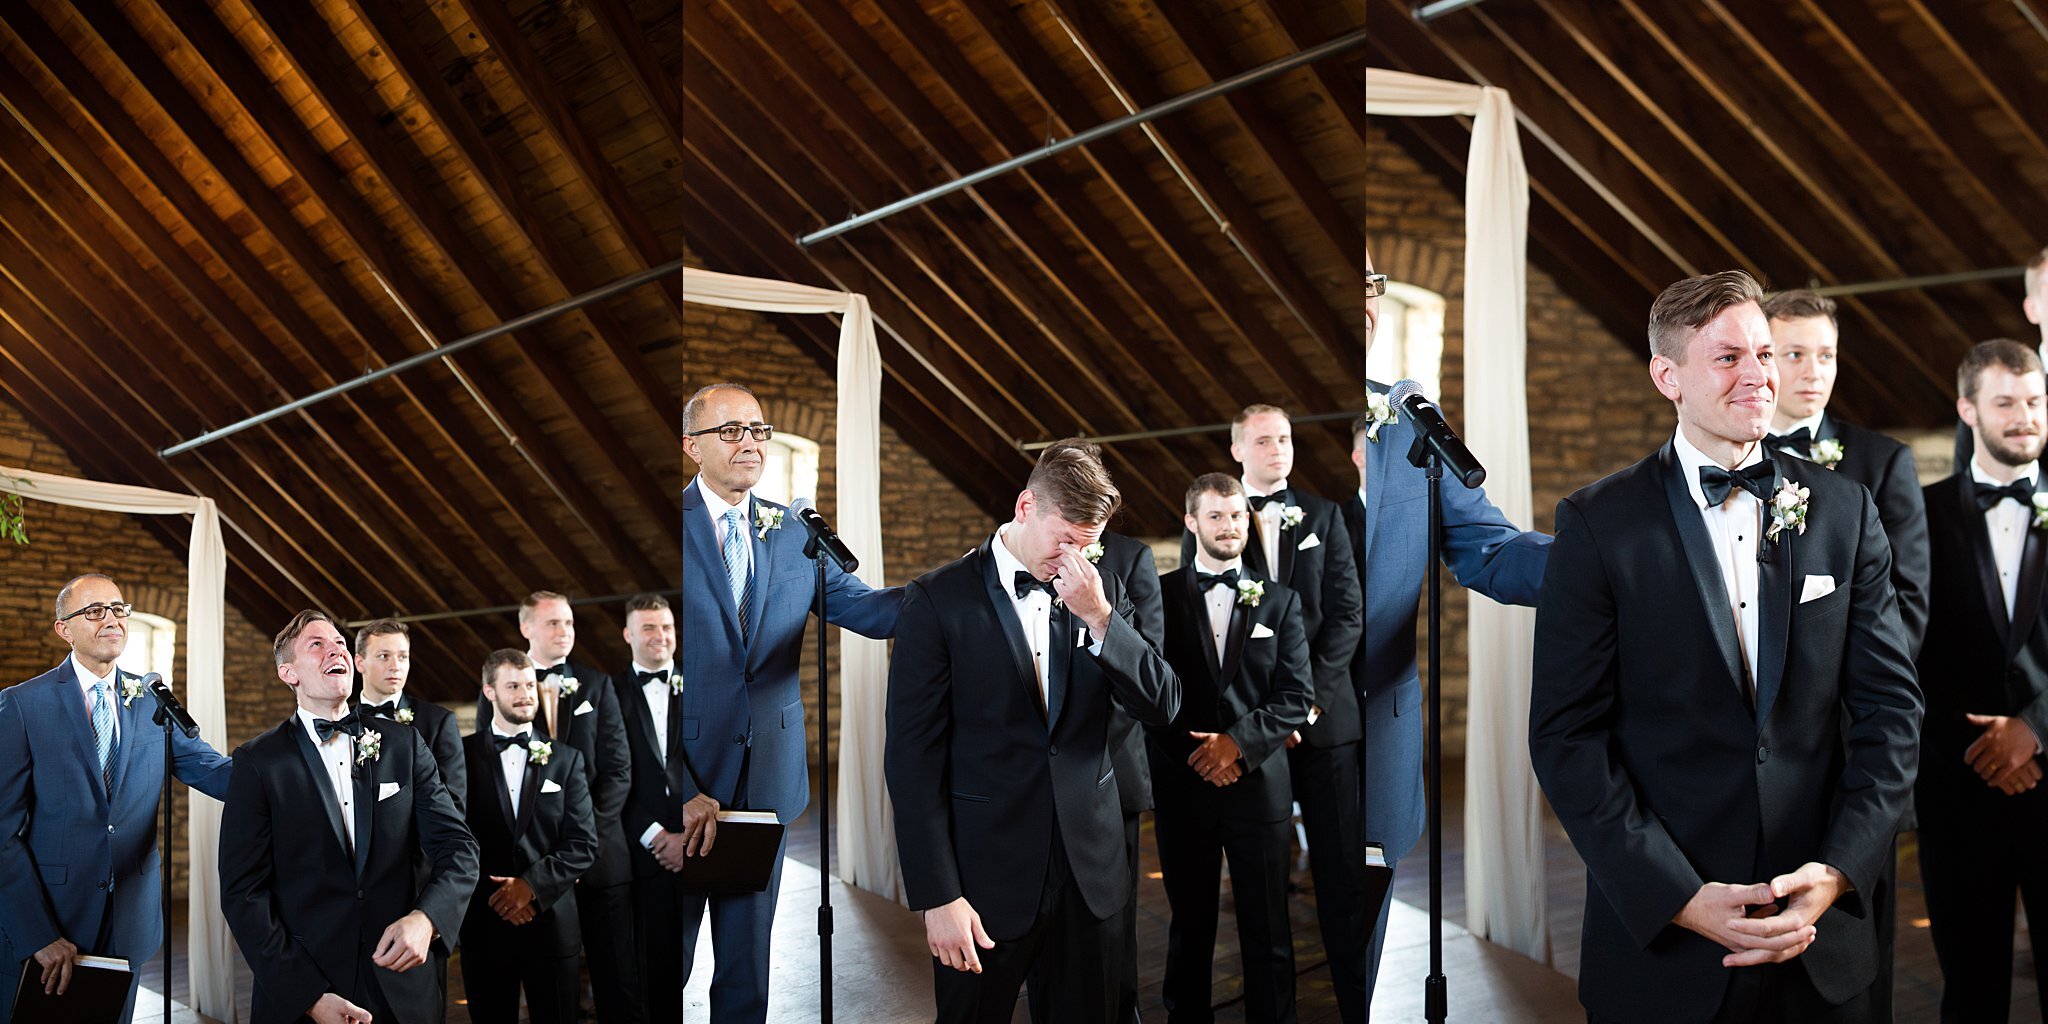  Groom tearing up seeing bride and her father walk down the aisle. 